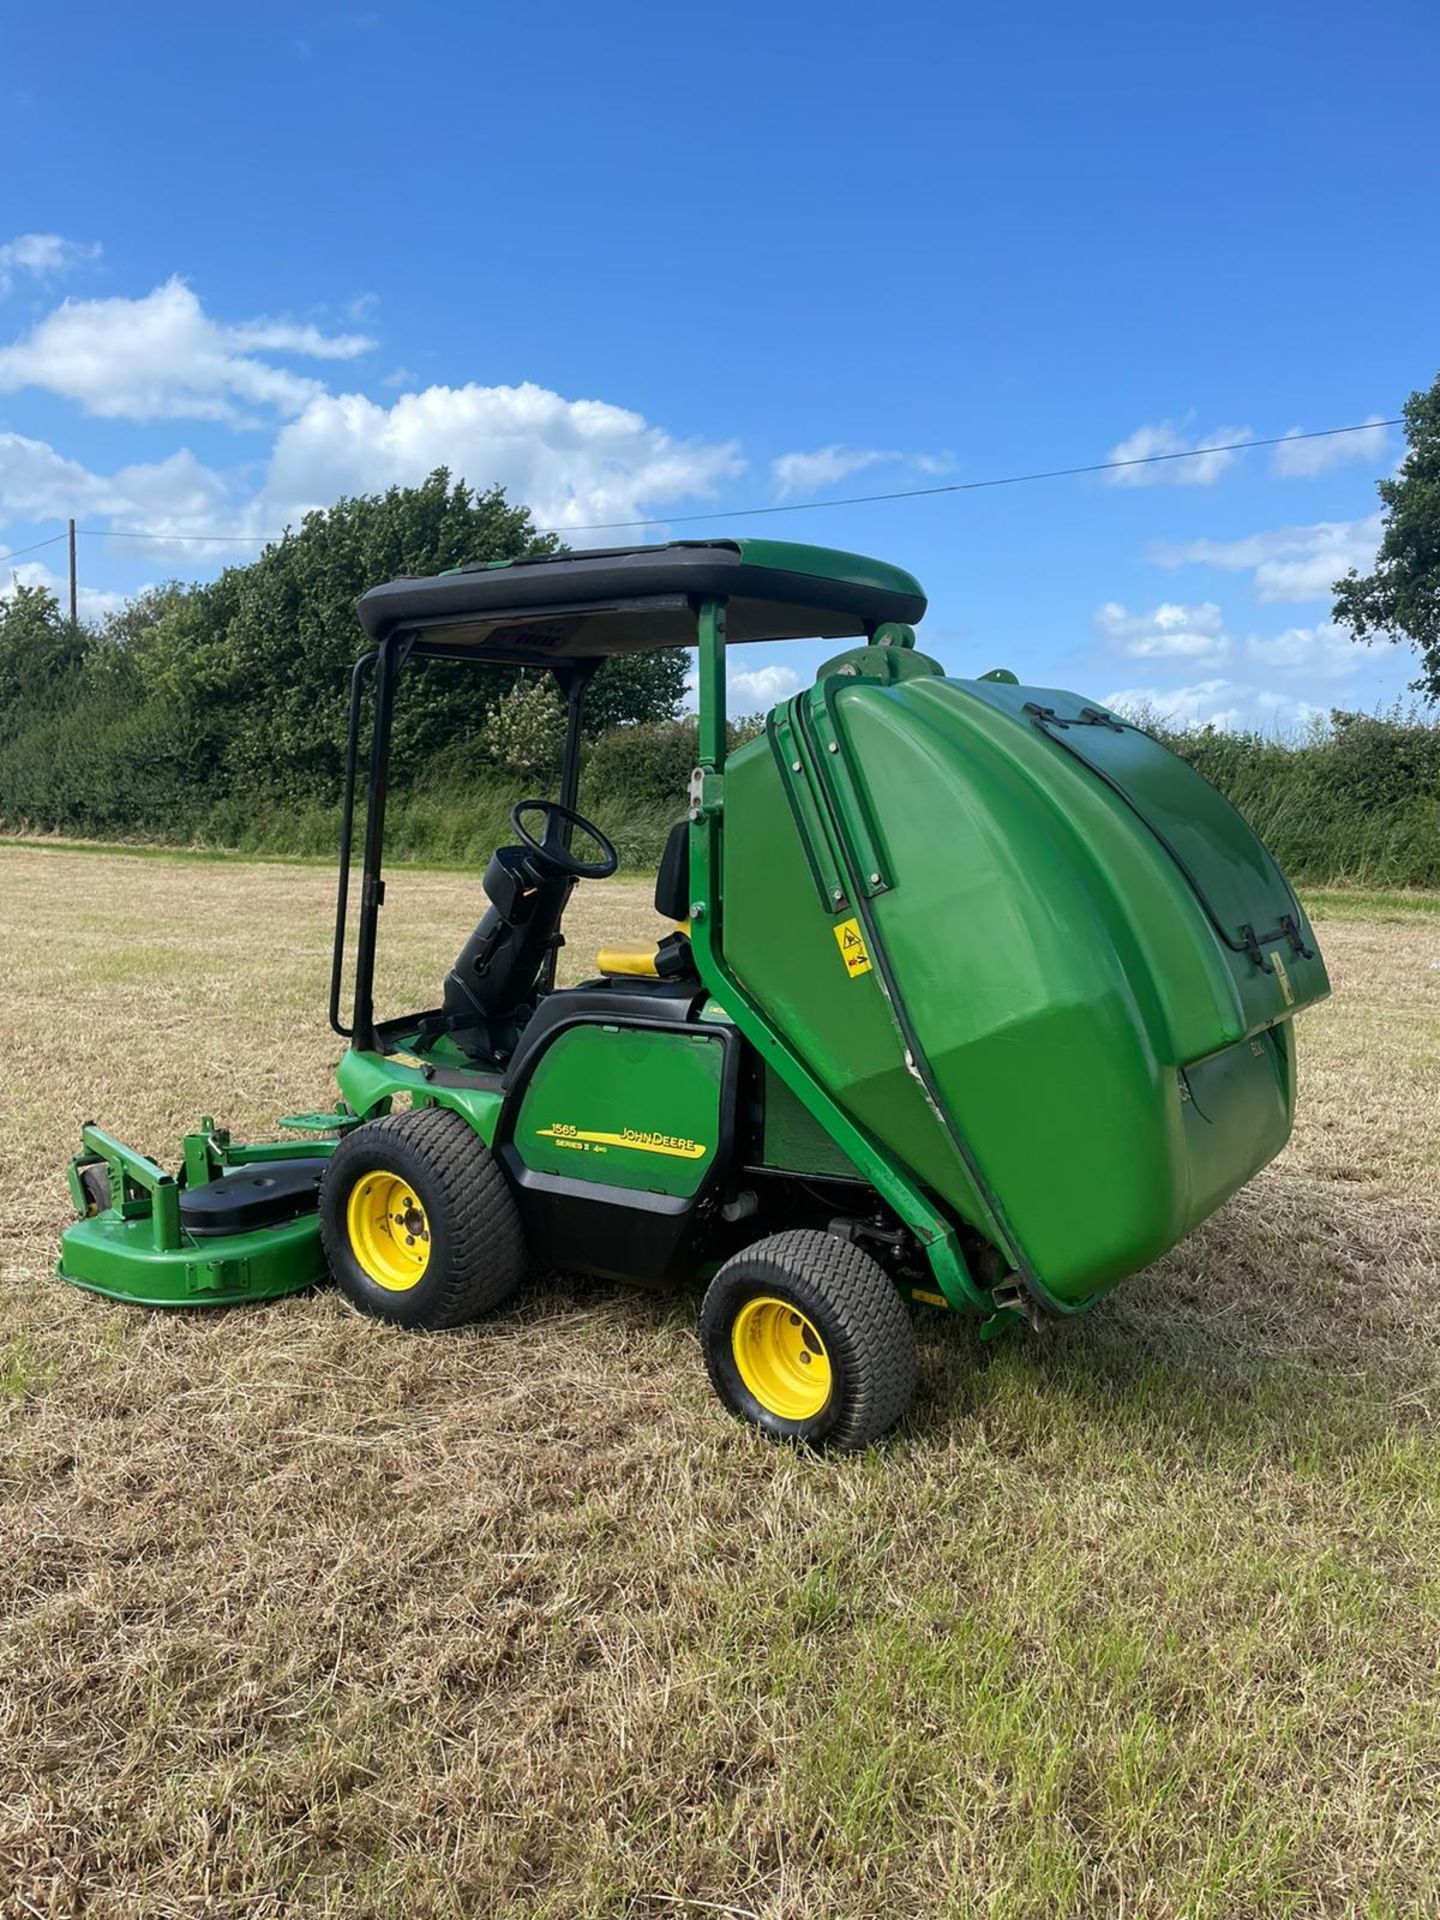 JOHN DEERE 1565 SERIES 2 RIDE ON LAWN MOWER WITH CLAMSHELL COLLECTOR *NO VAT* - Image 5 of 12